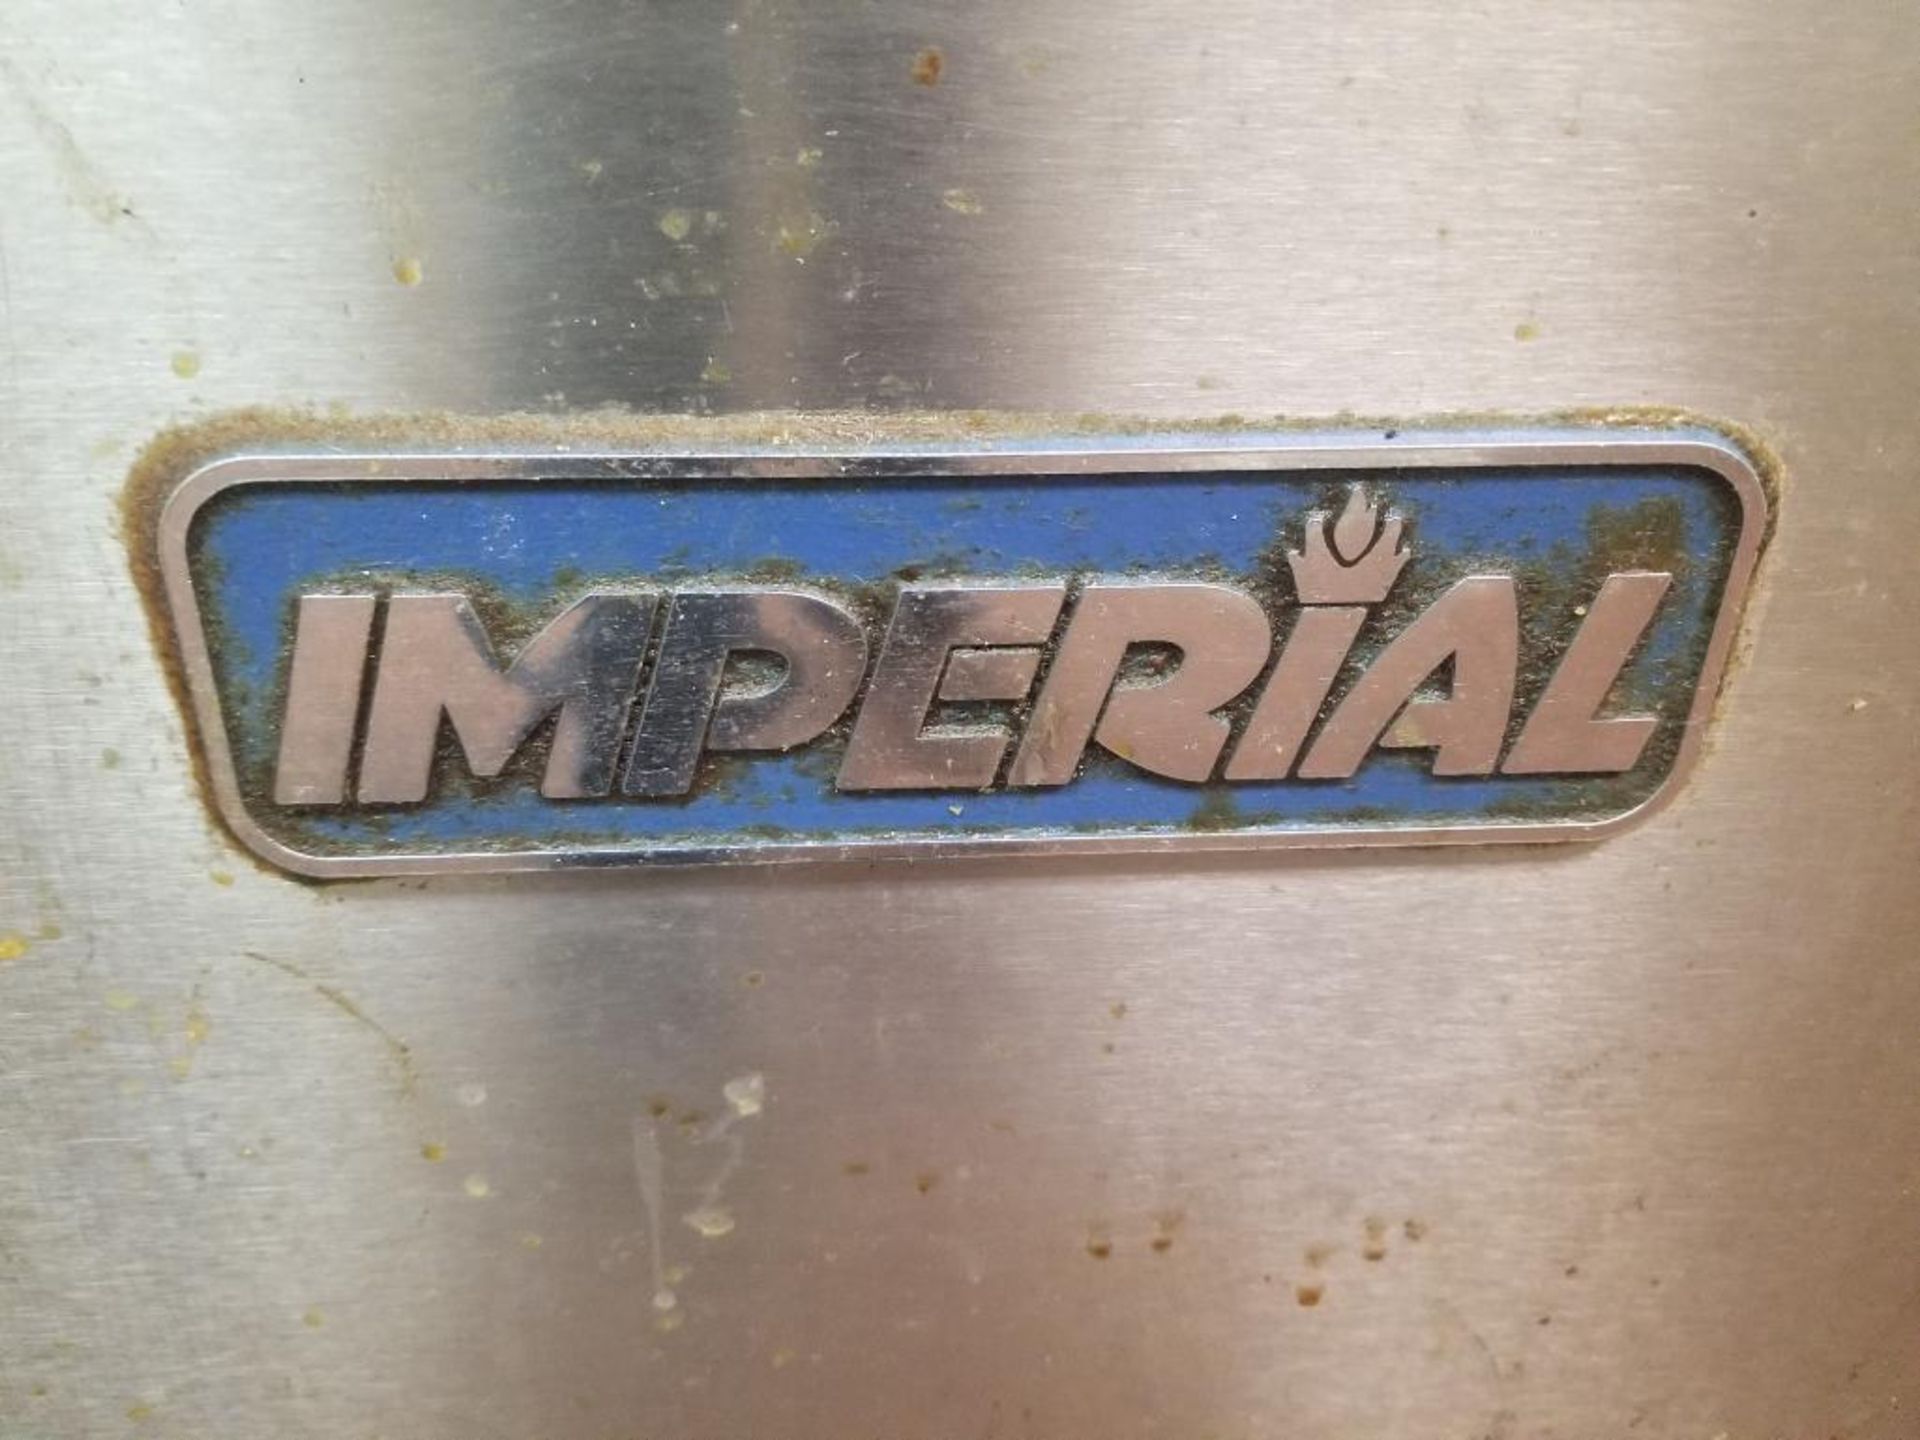 Imperial natural gas double basket deep fryer. Model IFS-40. - Image 2 of 6